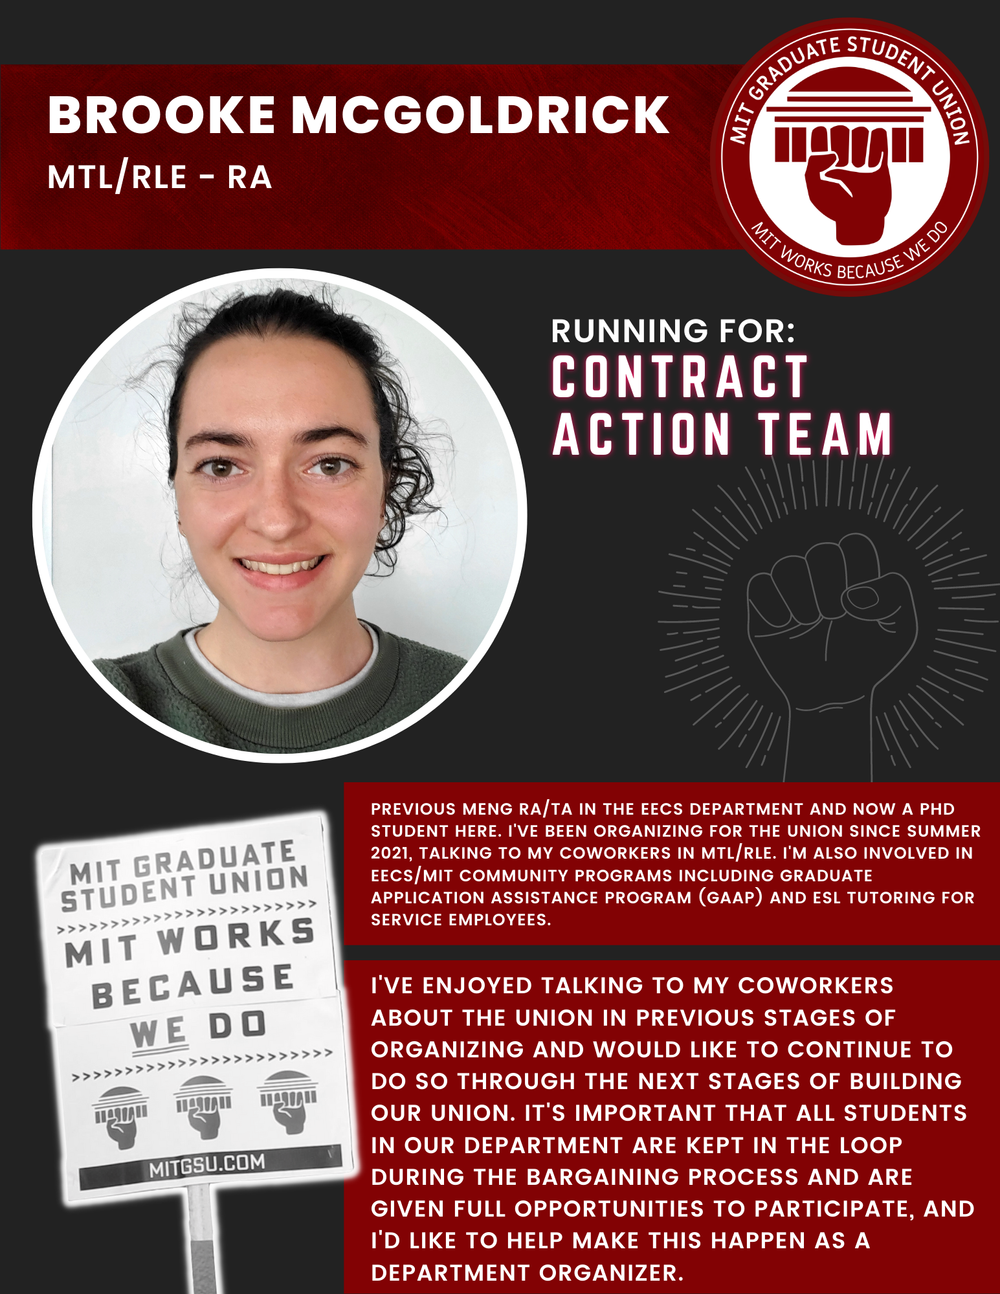  BROOKE MCGOLDRICK MTL/RLE - RA   RUNNING FOR: Contract Action Team  PREVIOUS MENG RA/TA IN THE EECS DEPARTMENT AND NOW A PHD STUDENT HERE. I'VE BEEN ORGANIZING FOR THE UNION SINCE SUMMER 2021, TALKING TO MY COWORKERS IN MTL/RLE. I'M ALSO INVOLVED IN